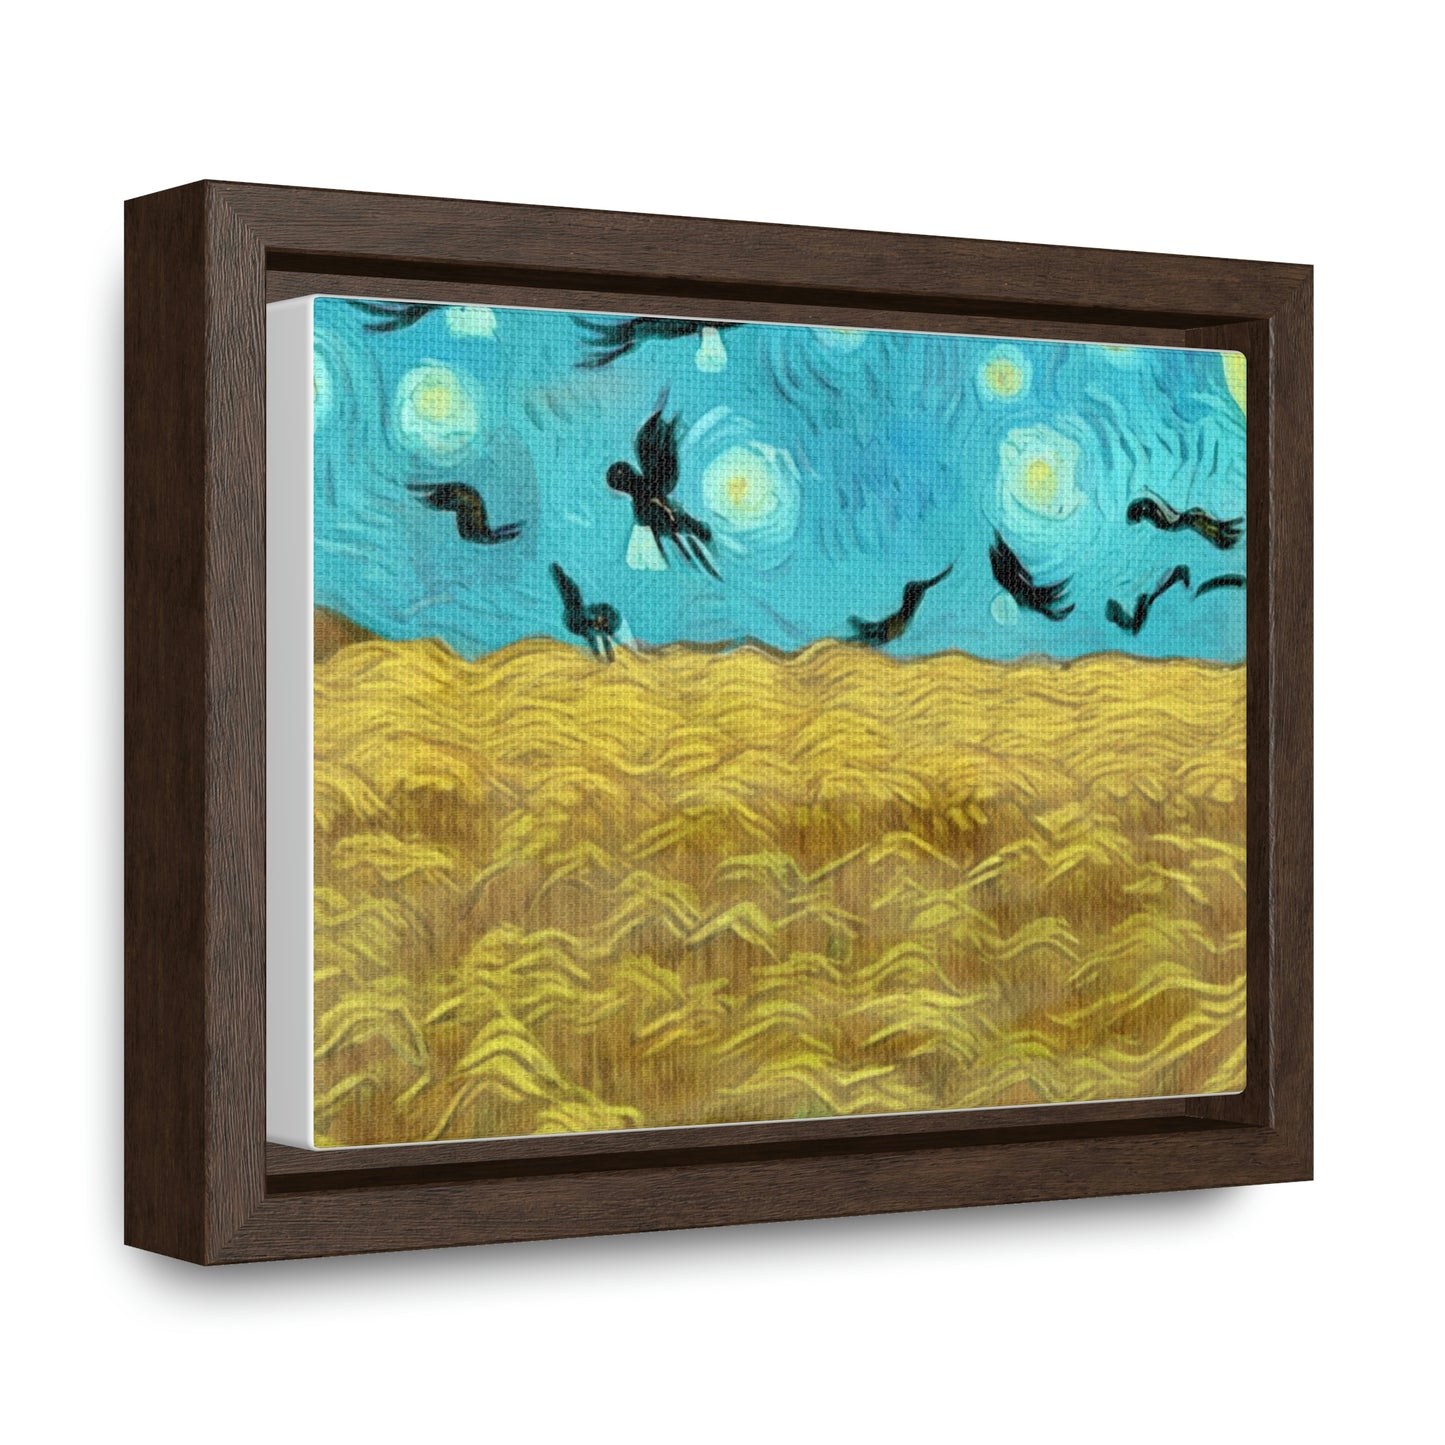 Vincents Nature, Crows in a Field